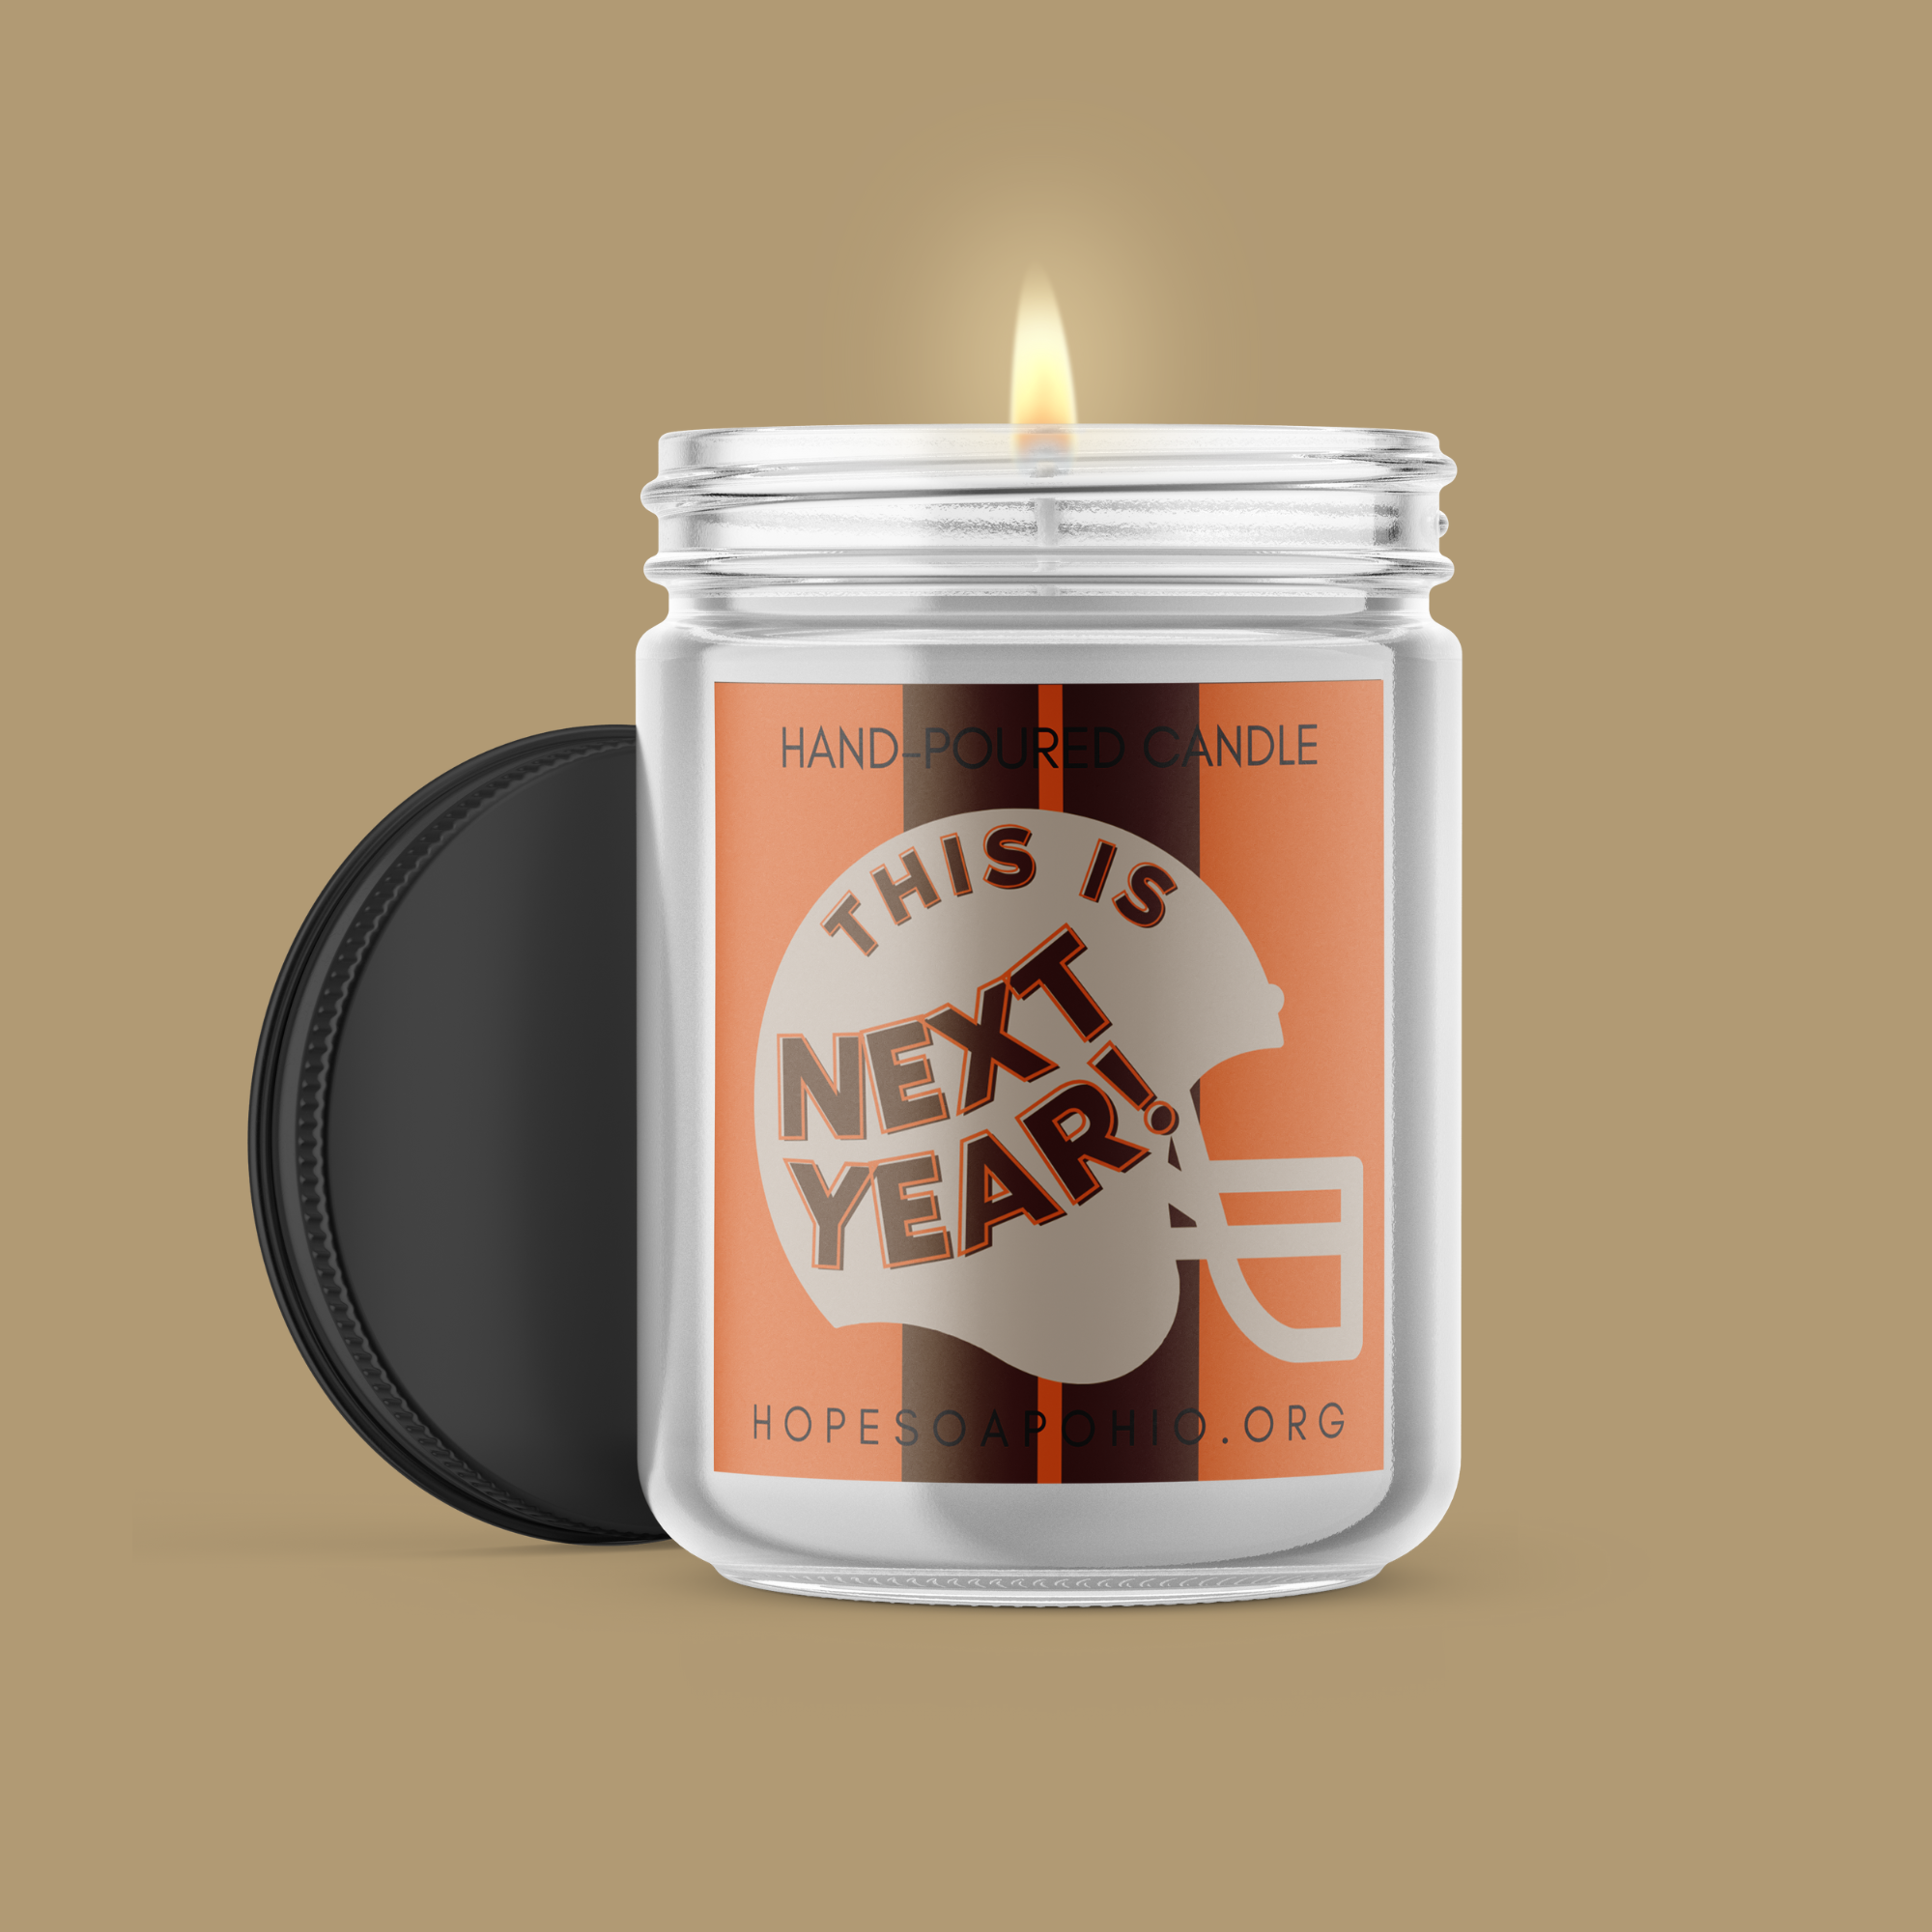 This is next year- Browns candle